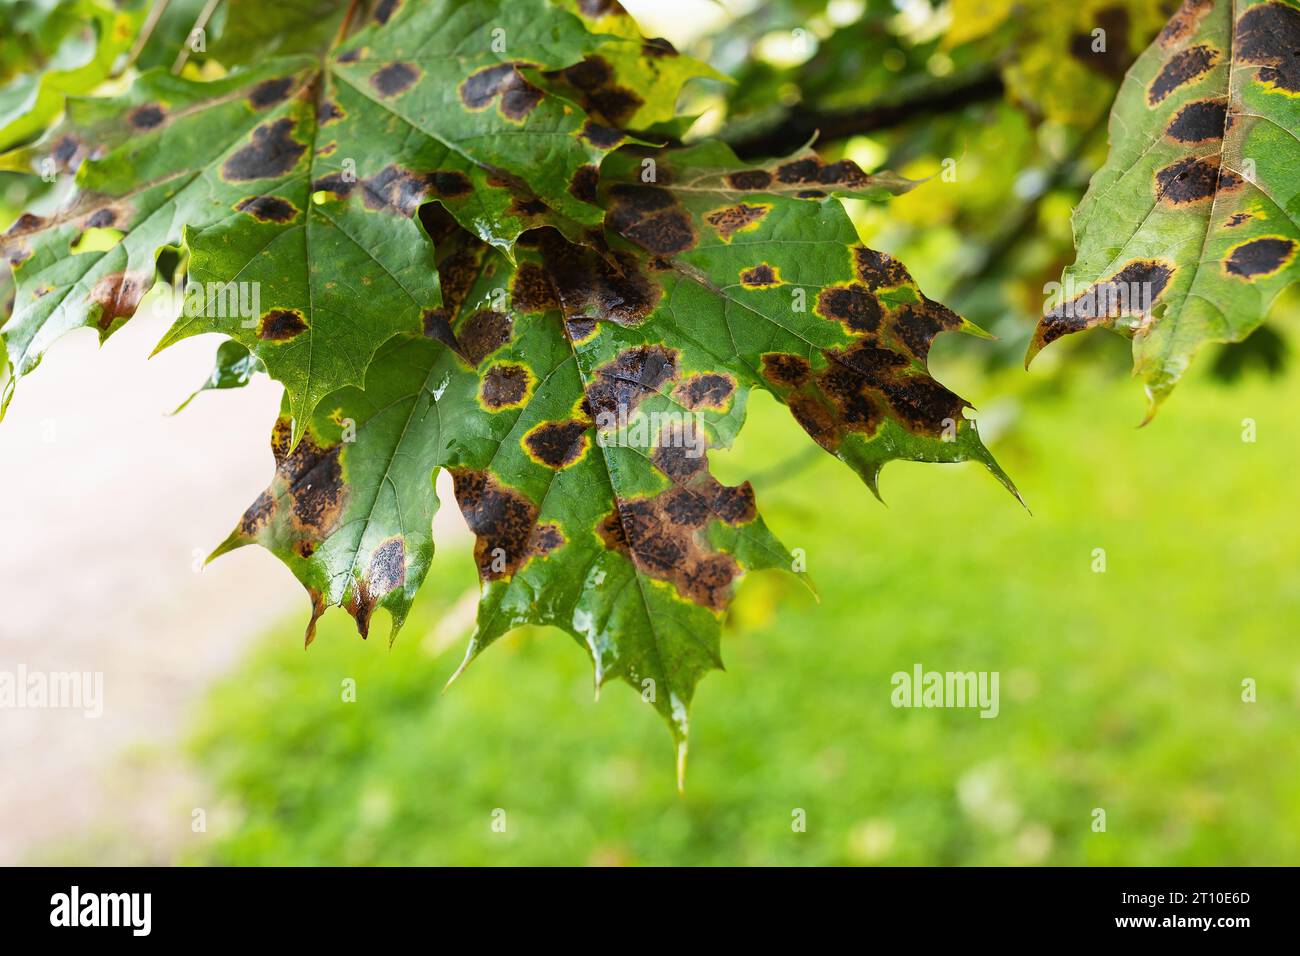 A fungal disease on maple leaves in the form of dark spots caused by the pathogen Rhytisma Acerinum Stock Photo